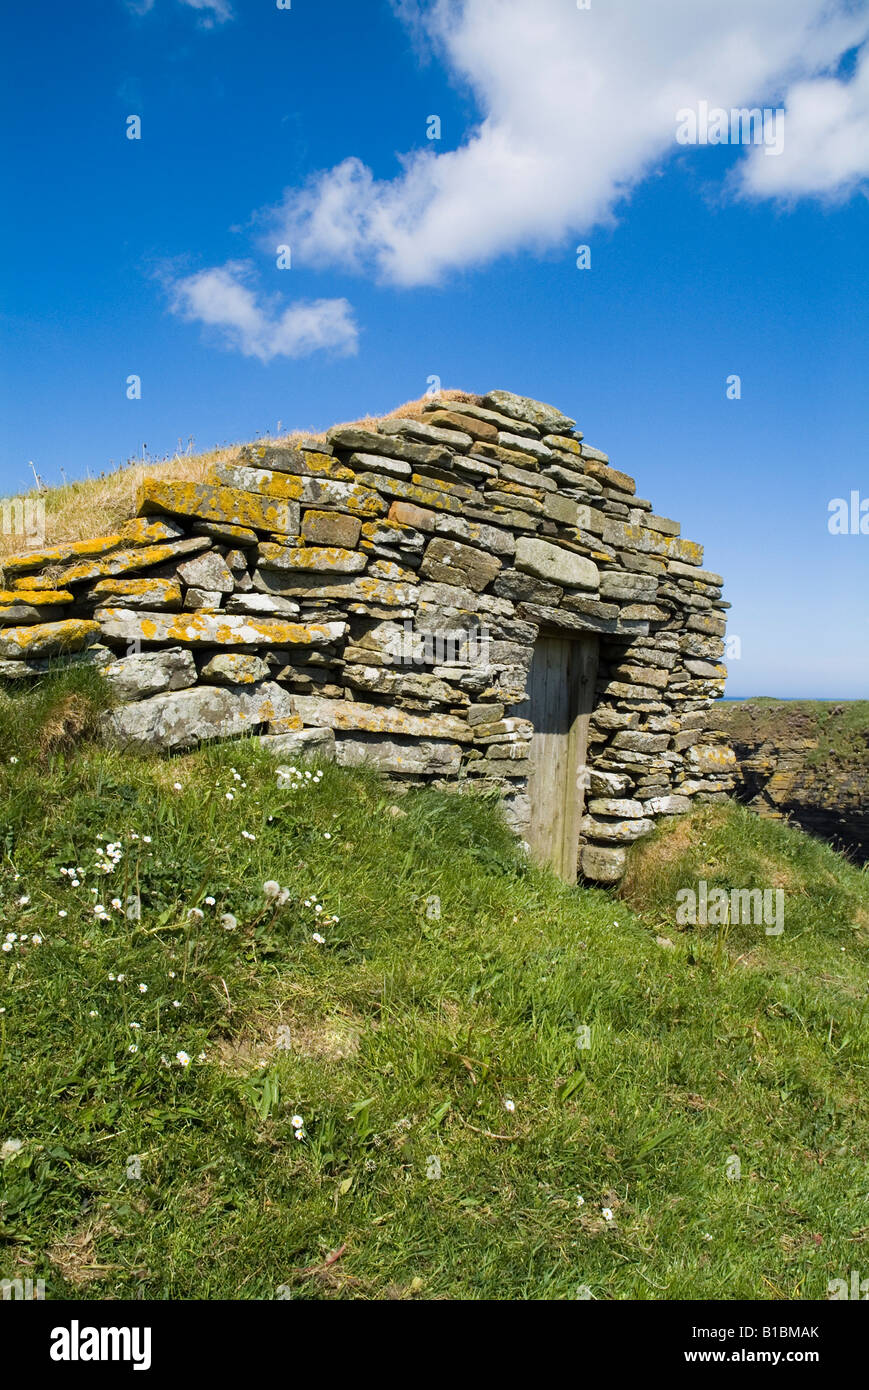 dh  BIRSAY ORKNEY Fishermens stone hut storage traditional building heritage Stock Photo